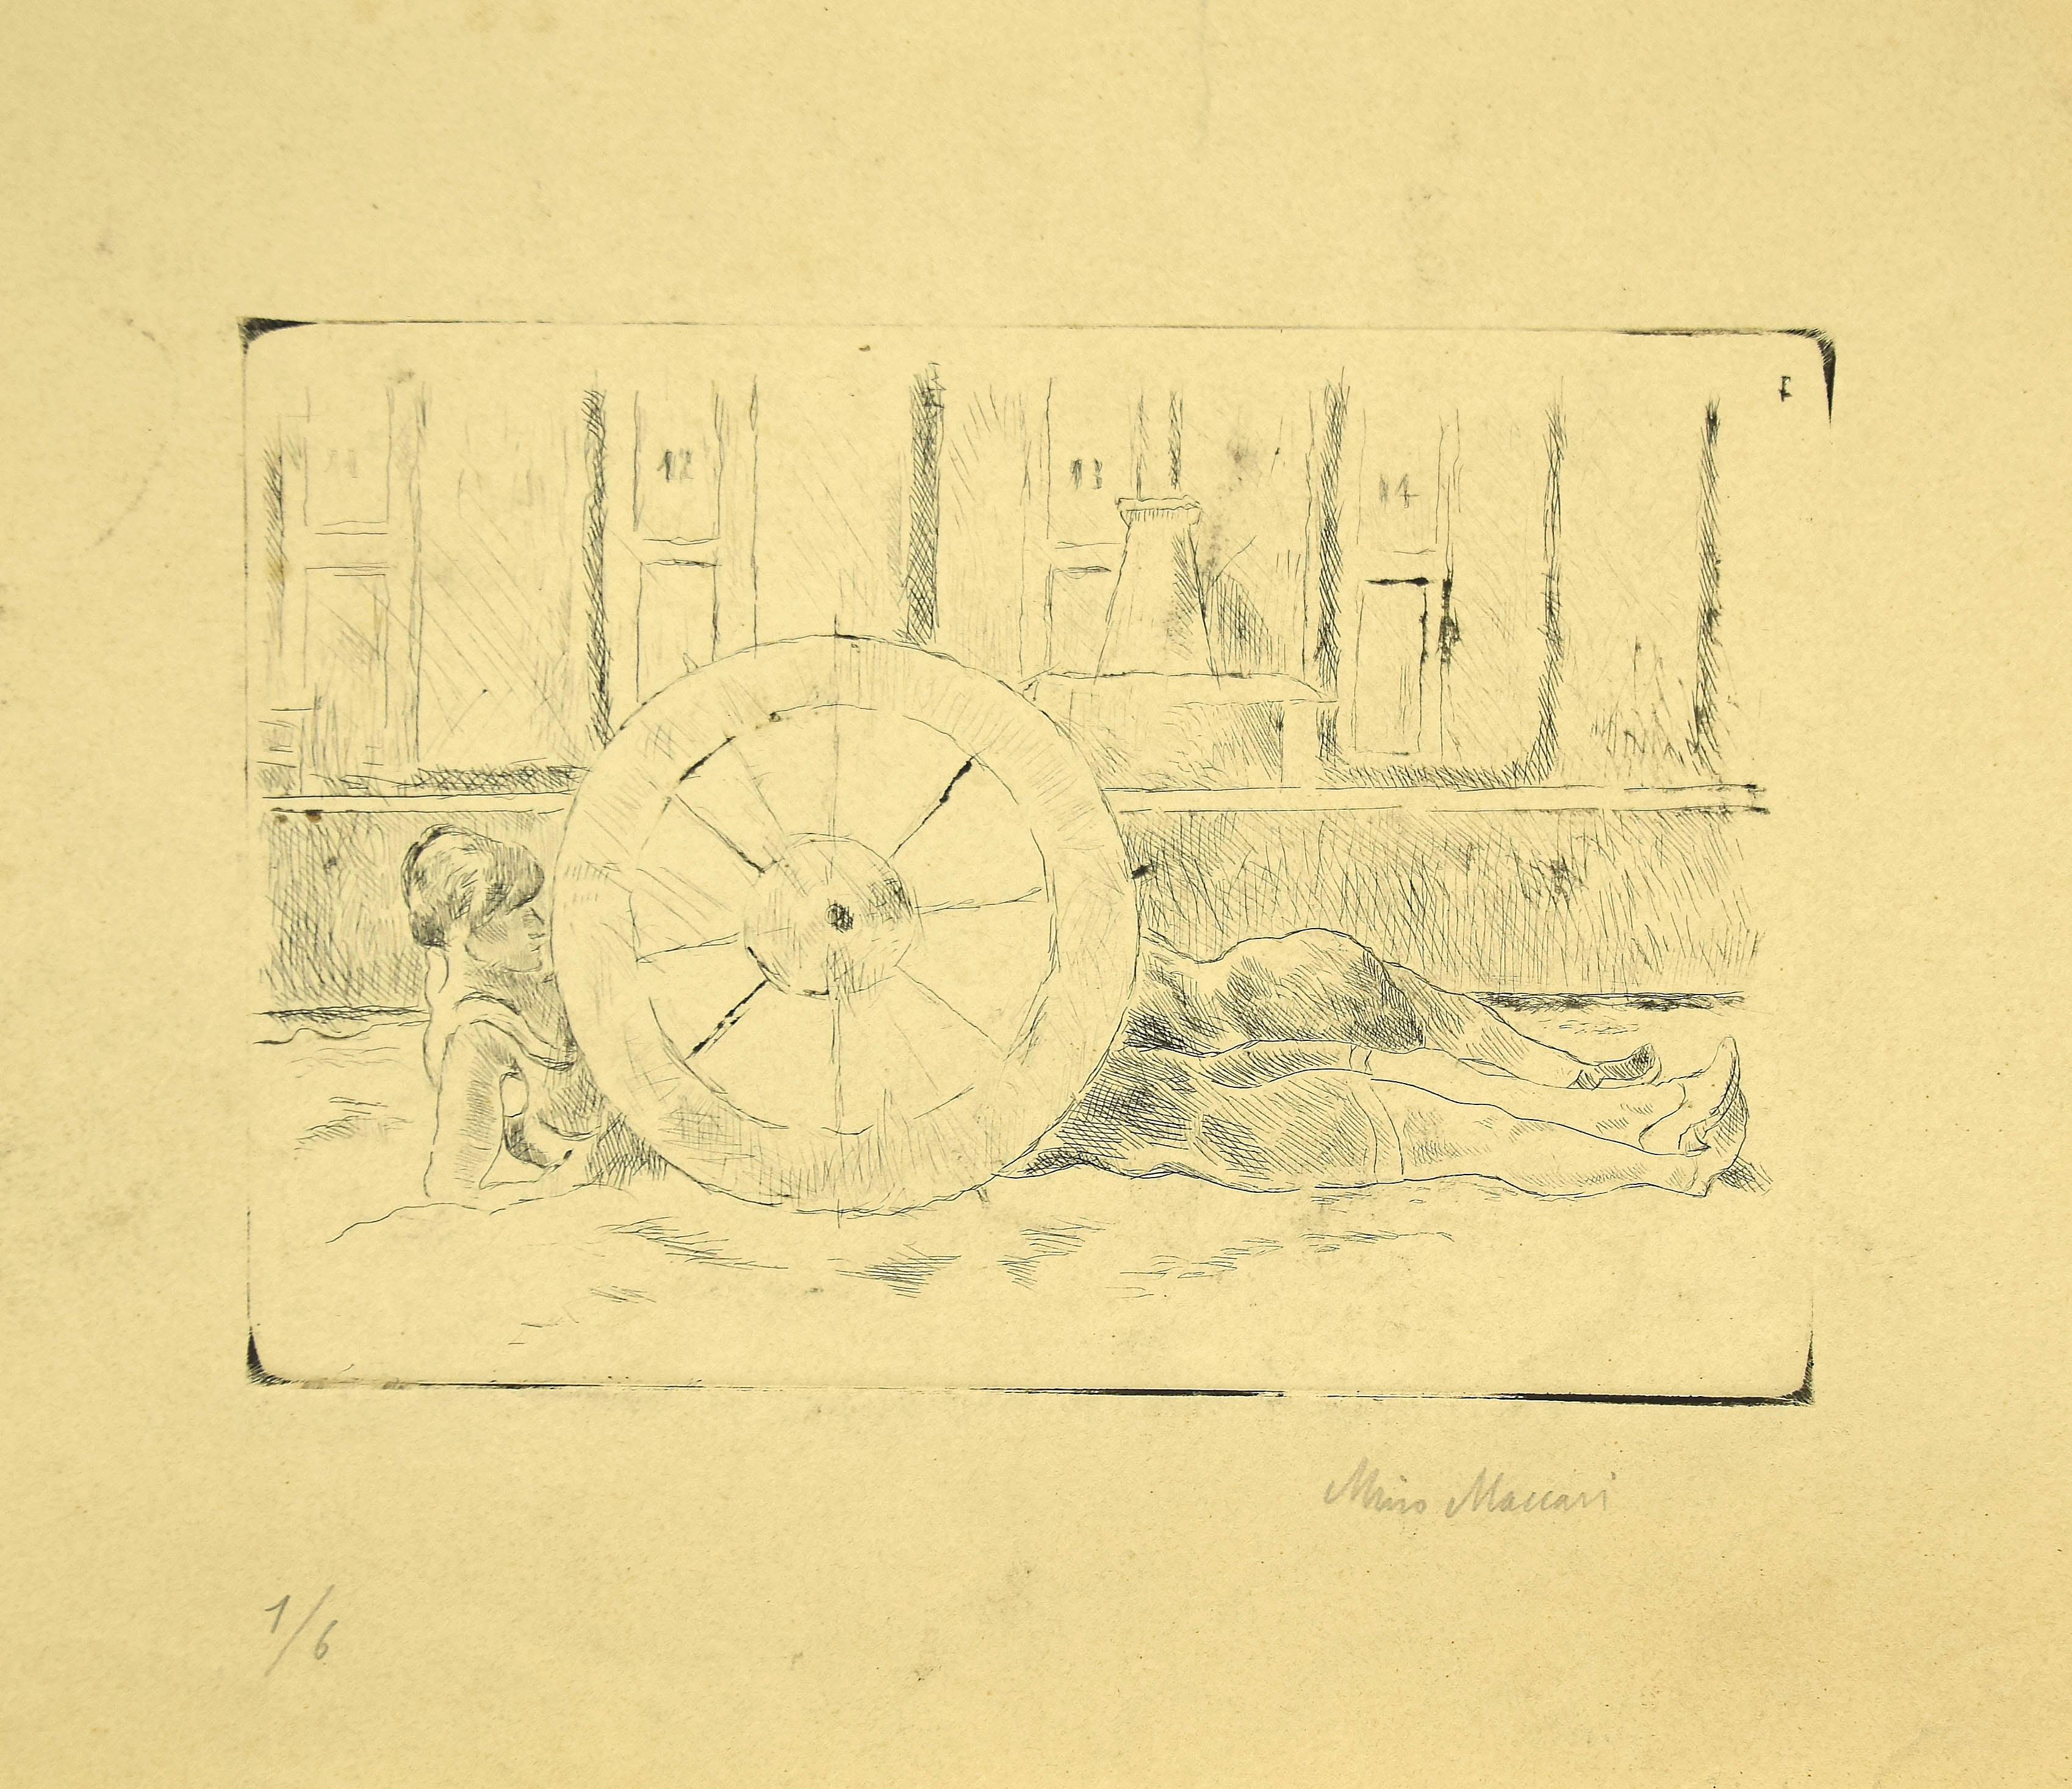 The Wheel is an original modern artwork realized in the first half of the XX Century by the Italian artist Mino Maccari (Siena, 1898 - Rome, 1989).

Original drypoint on paper. Edition of 6 prints.

Hand-signed in pencil by the artist on the lower